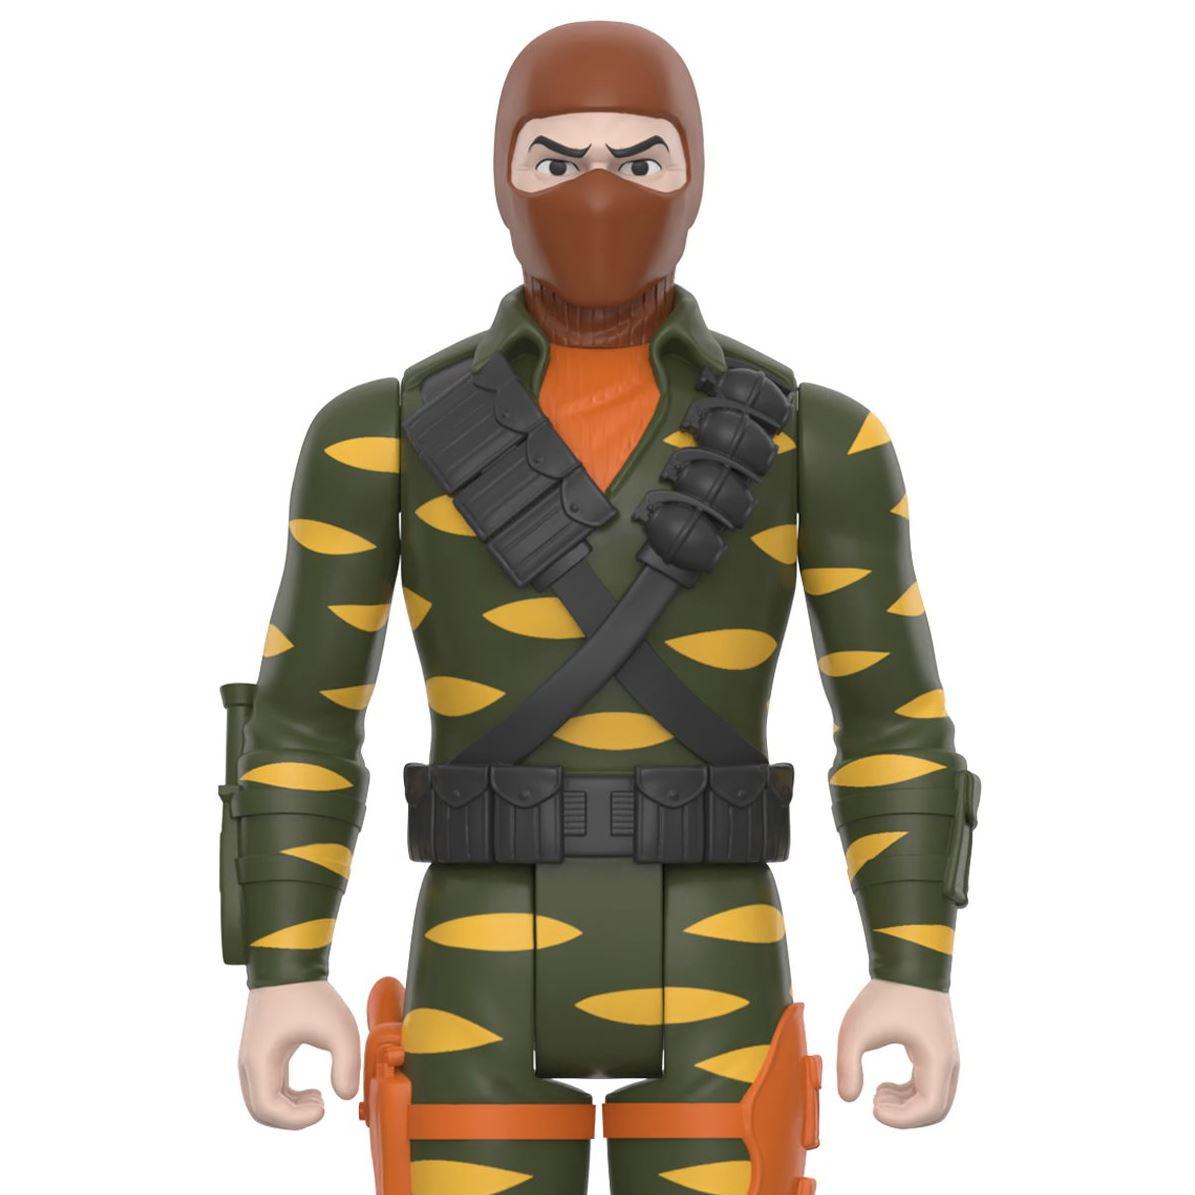 Super7 G.I. Joe Reaction Wave 8 Tiger Force Sabre Tooth Action Figure - COMING SOON